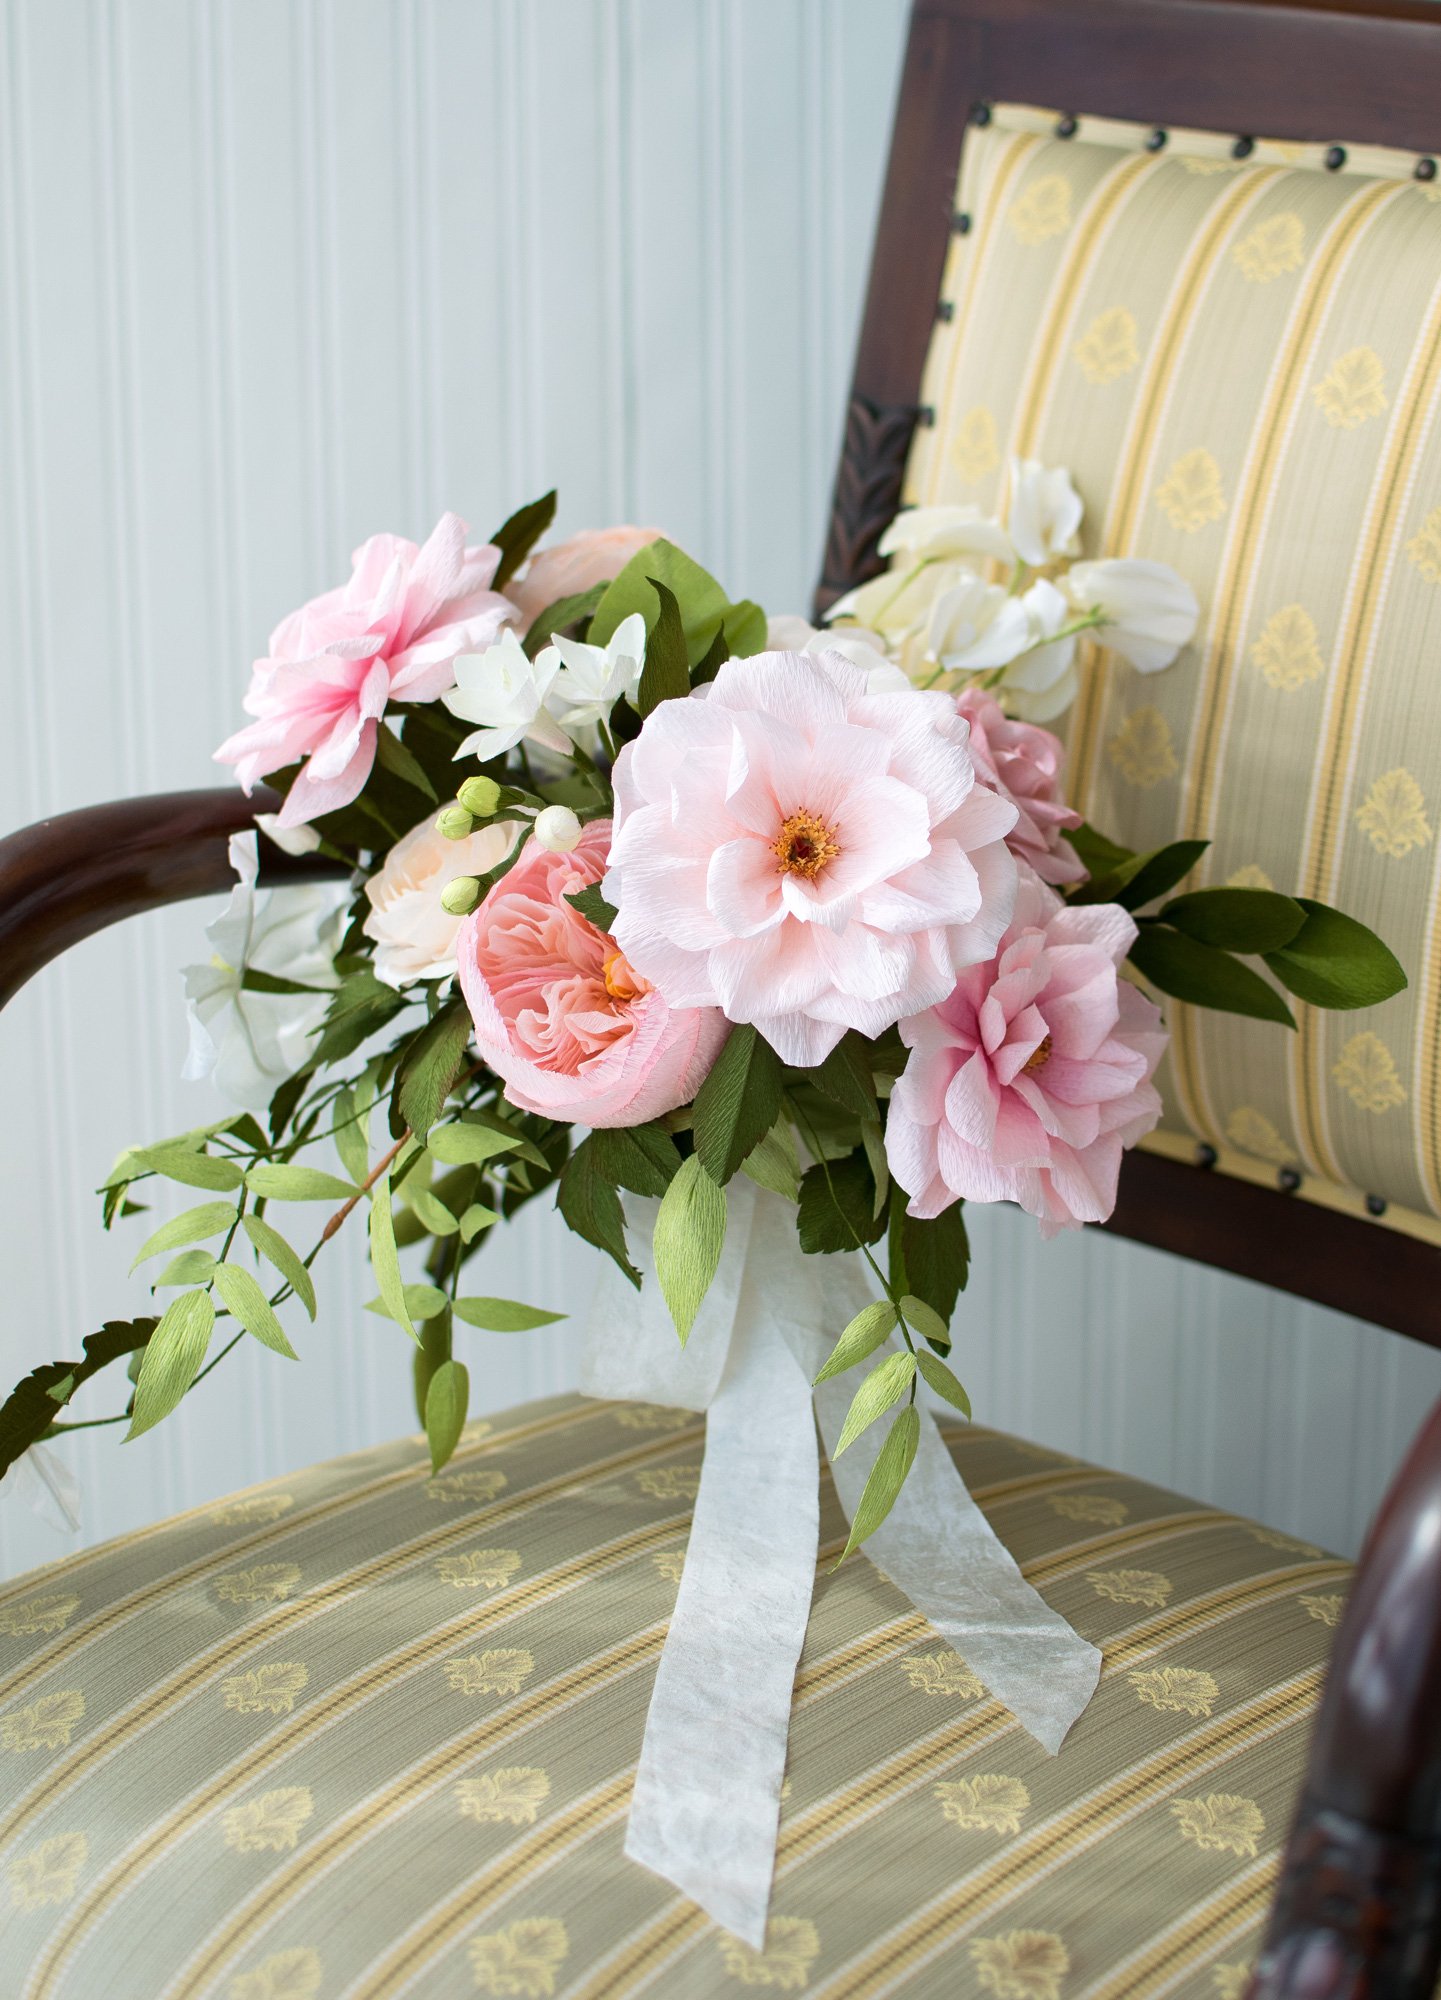 Pink-Blush-Paper-Bouquet-for-Maid-of-Honour-by-Crafted-to-Bloom-paperflowers.jpg